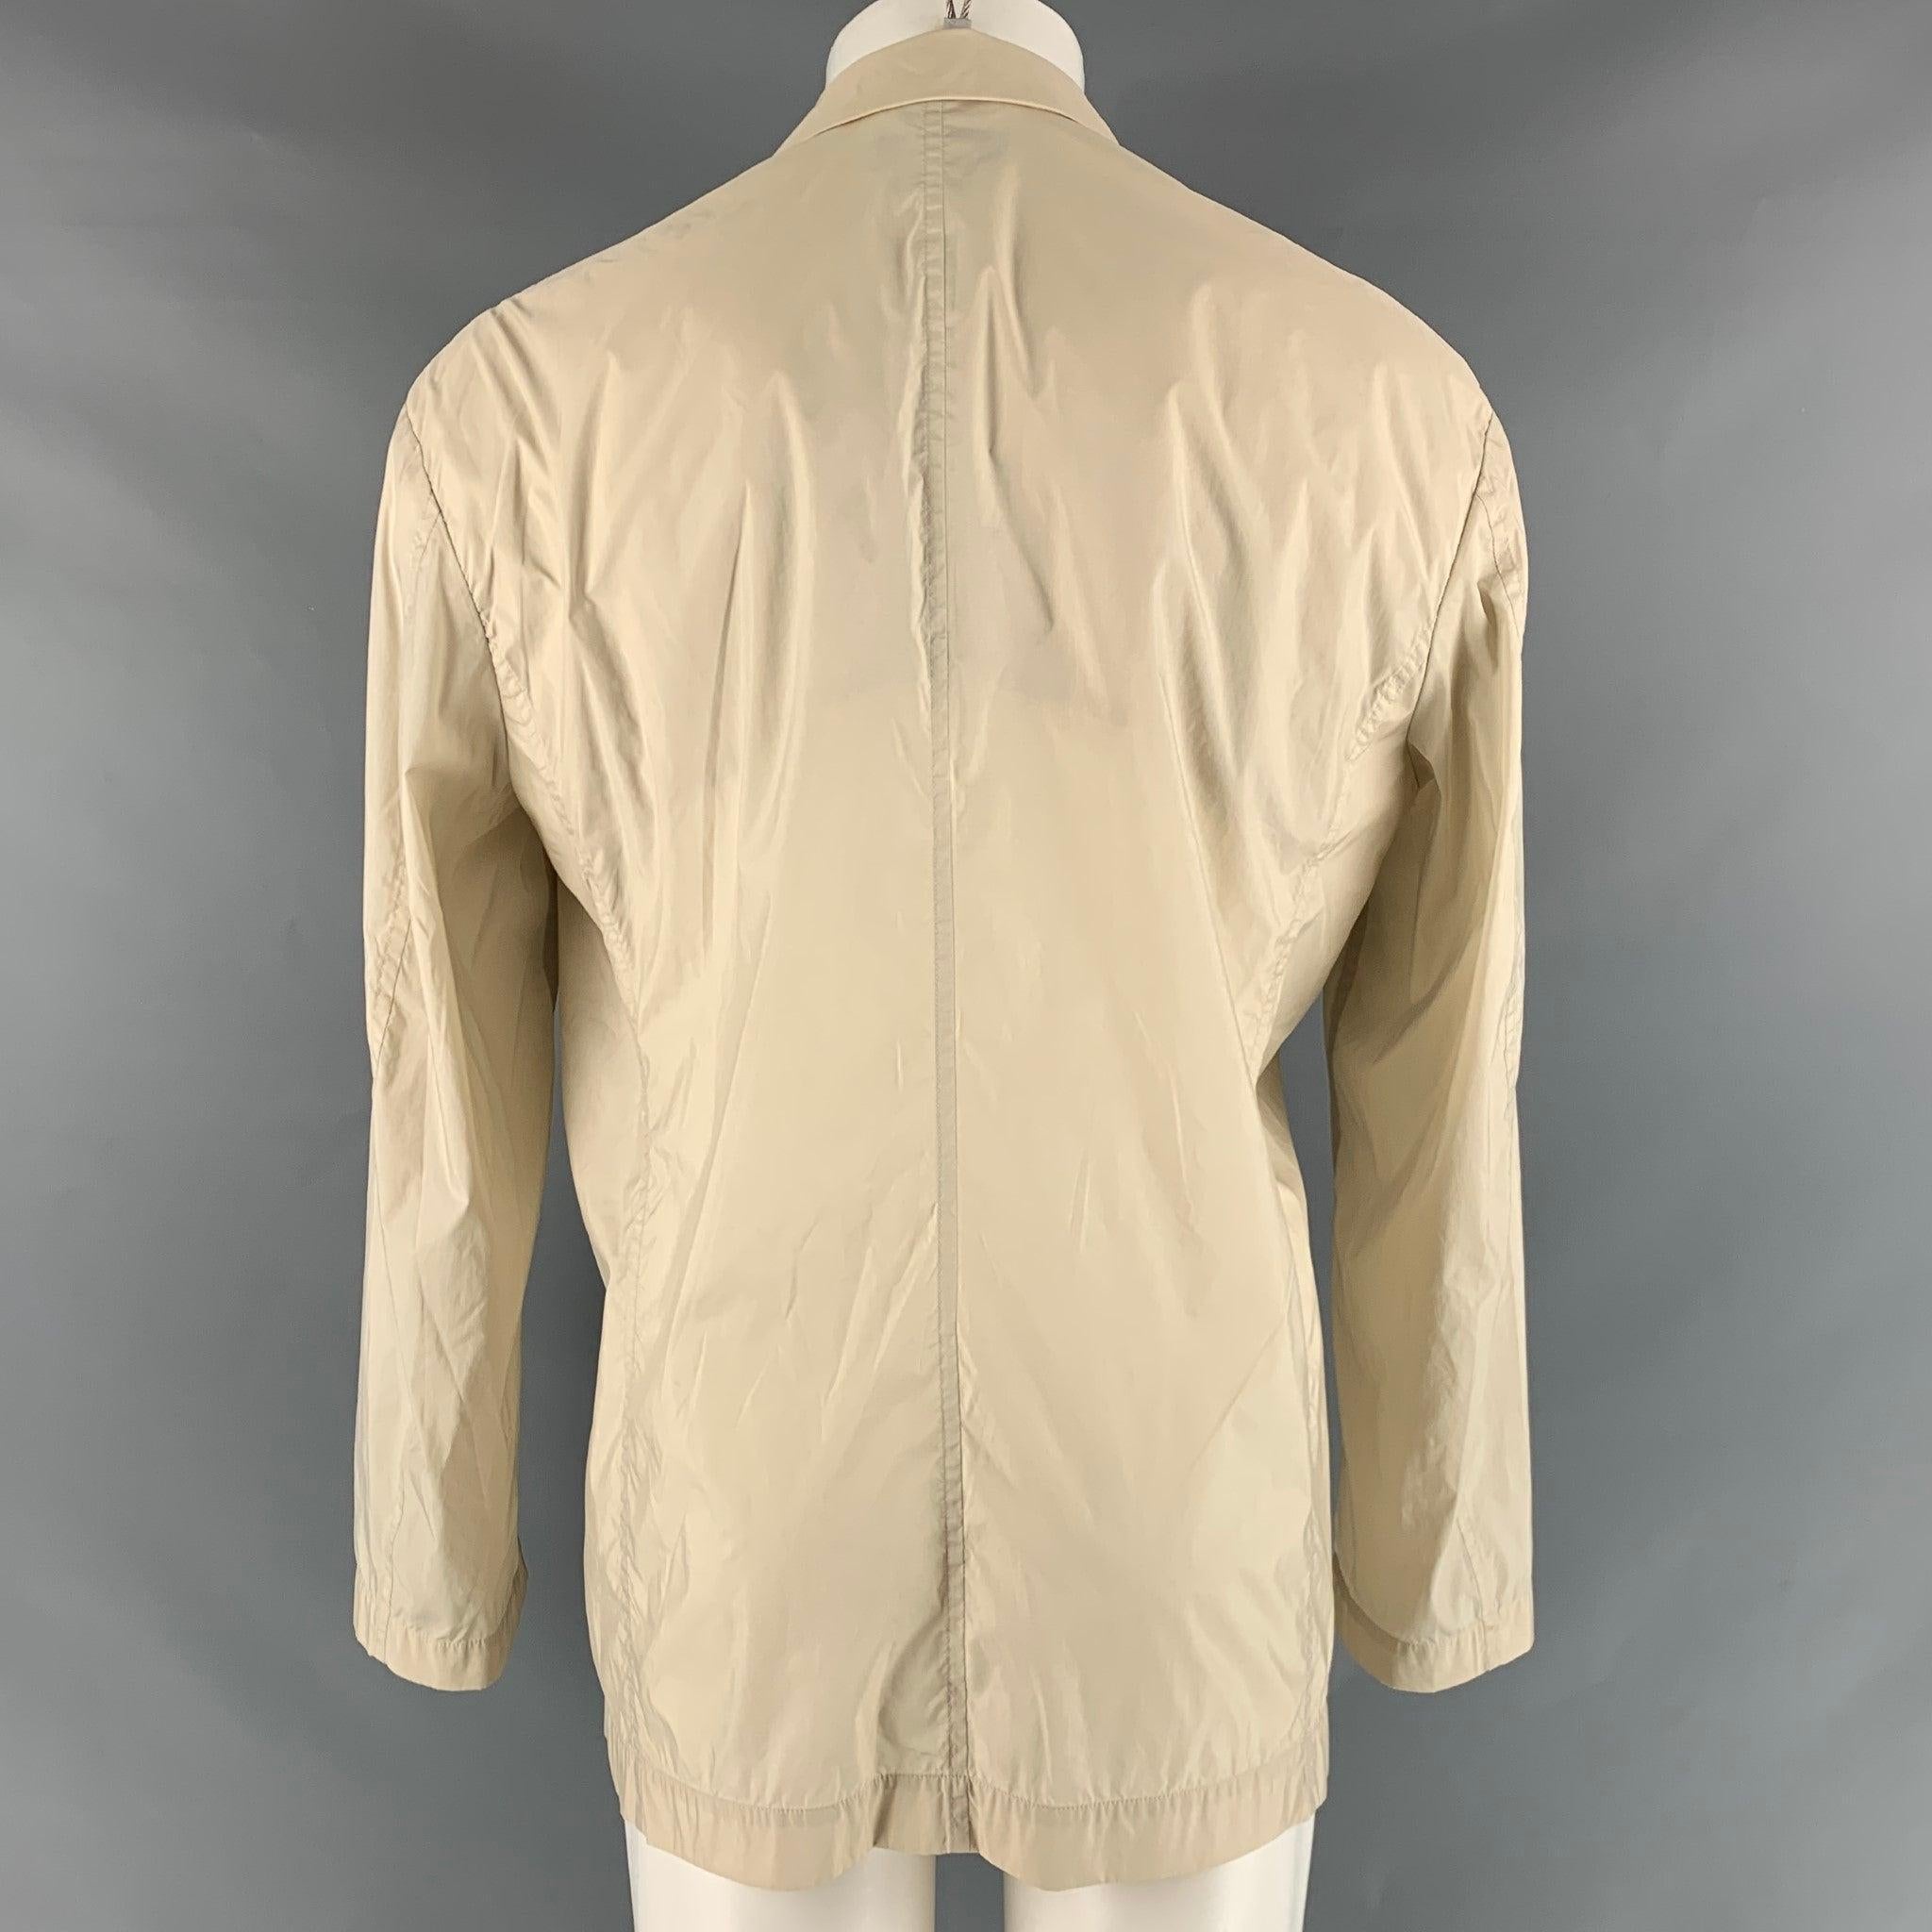 ISSEY MIYAKE Size 40 Beige Solid Nylon Notch Lapel Jacket In Excellent Condition For Sale In San Francisco, CA